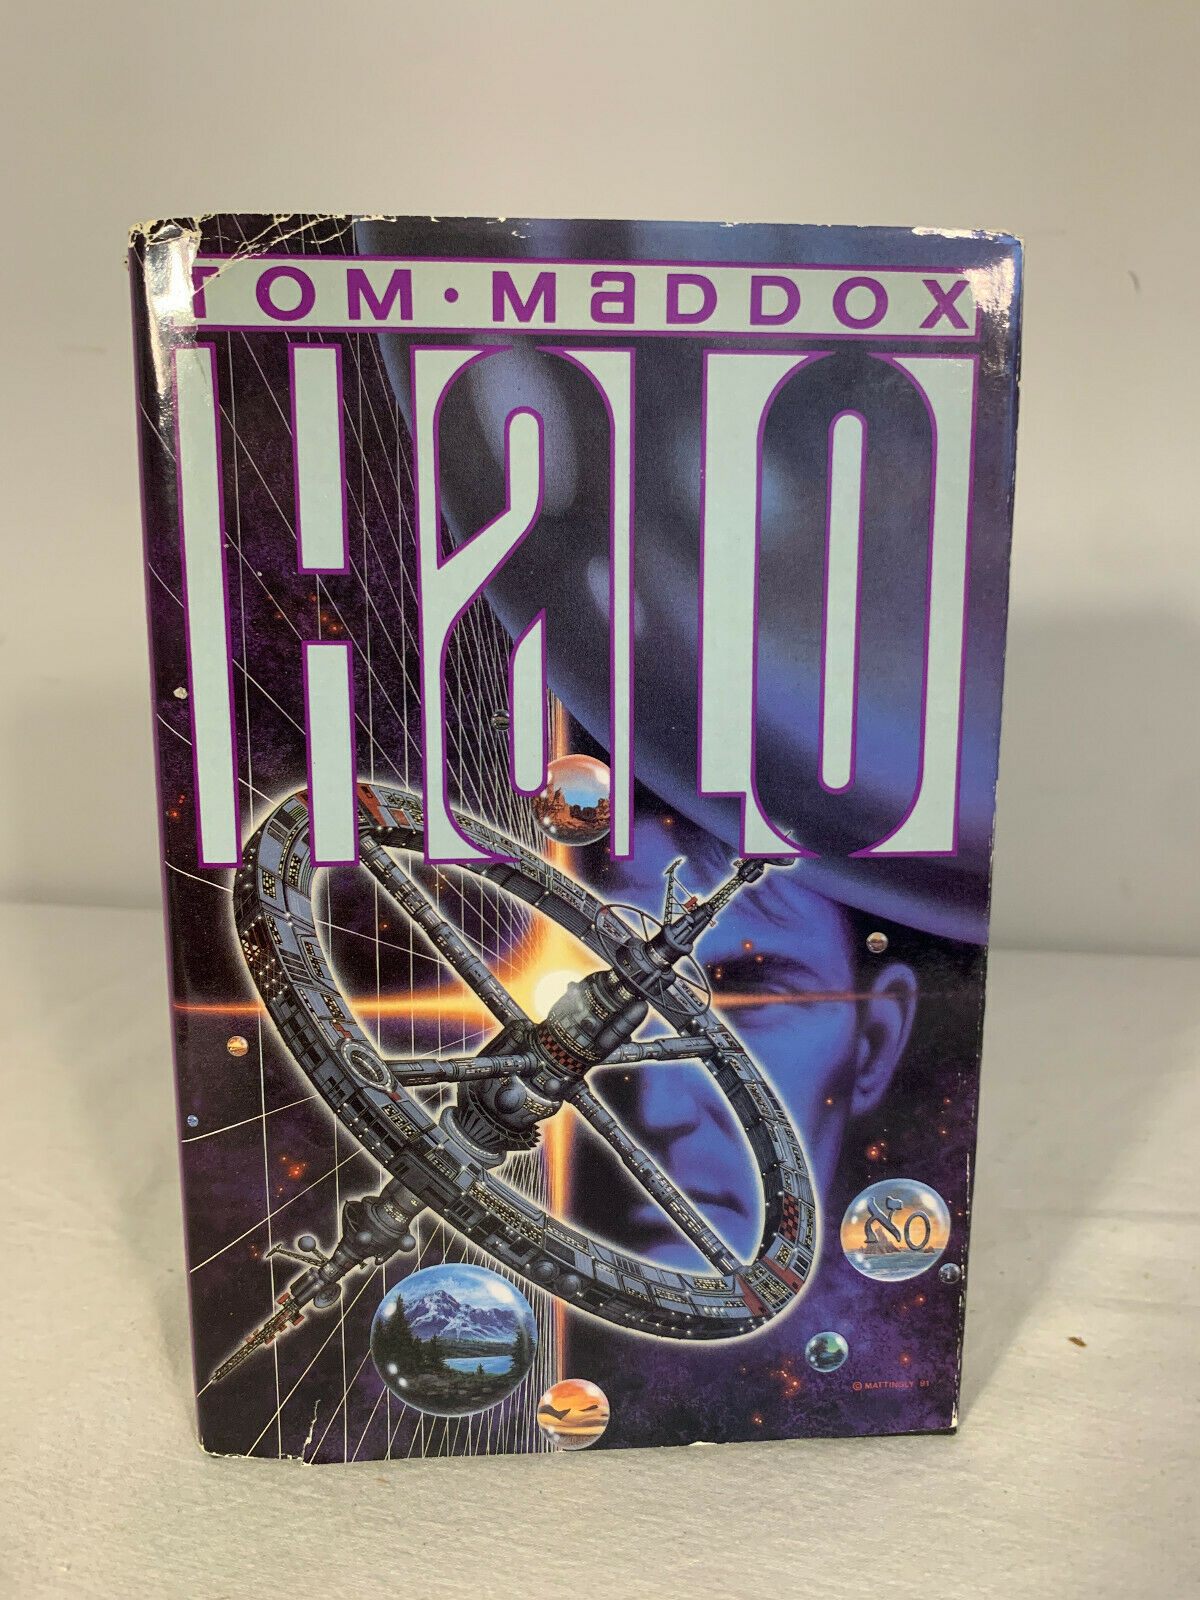 Halo by Tom Maddox - 1991 Hardcover, Science Fiction